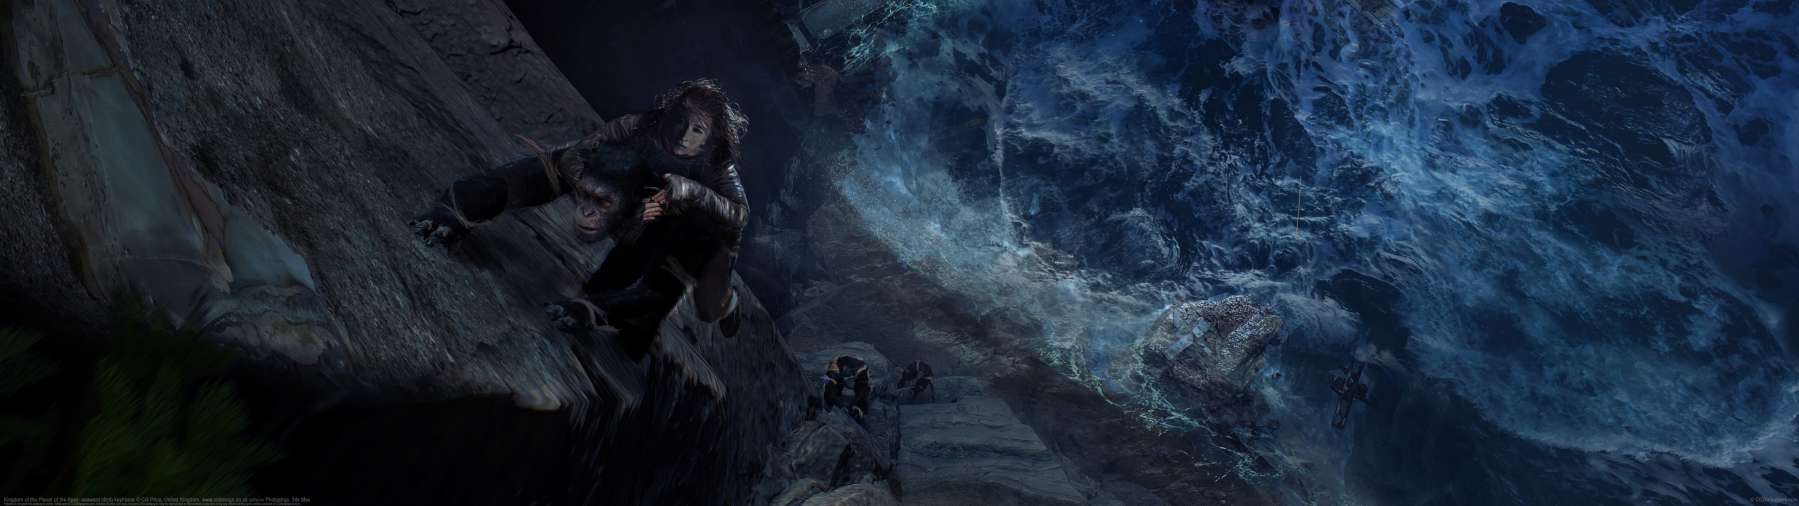 Kingdom of the Planet of the Apes: seaward climb keyframe ultrawide achtergrond